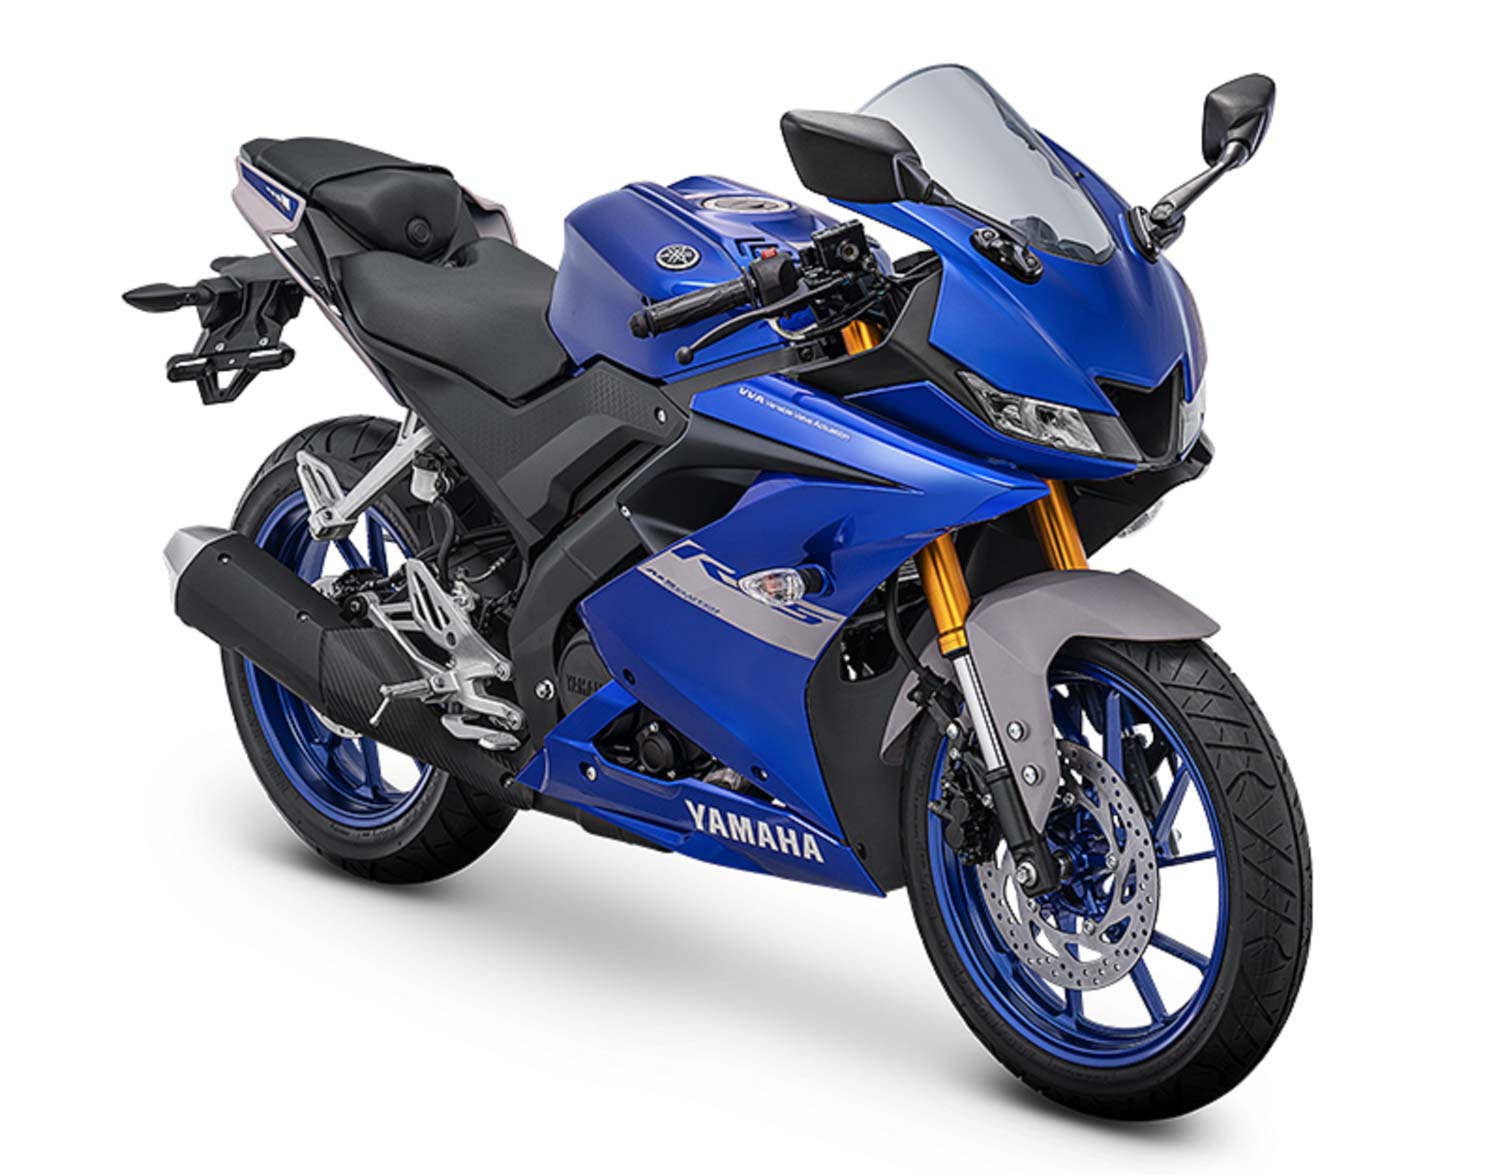 2022 Yamaha R15  V3  Launched With New Colour Options